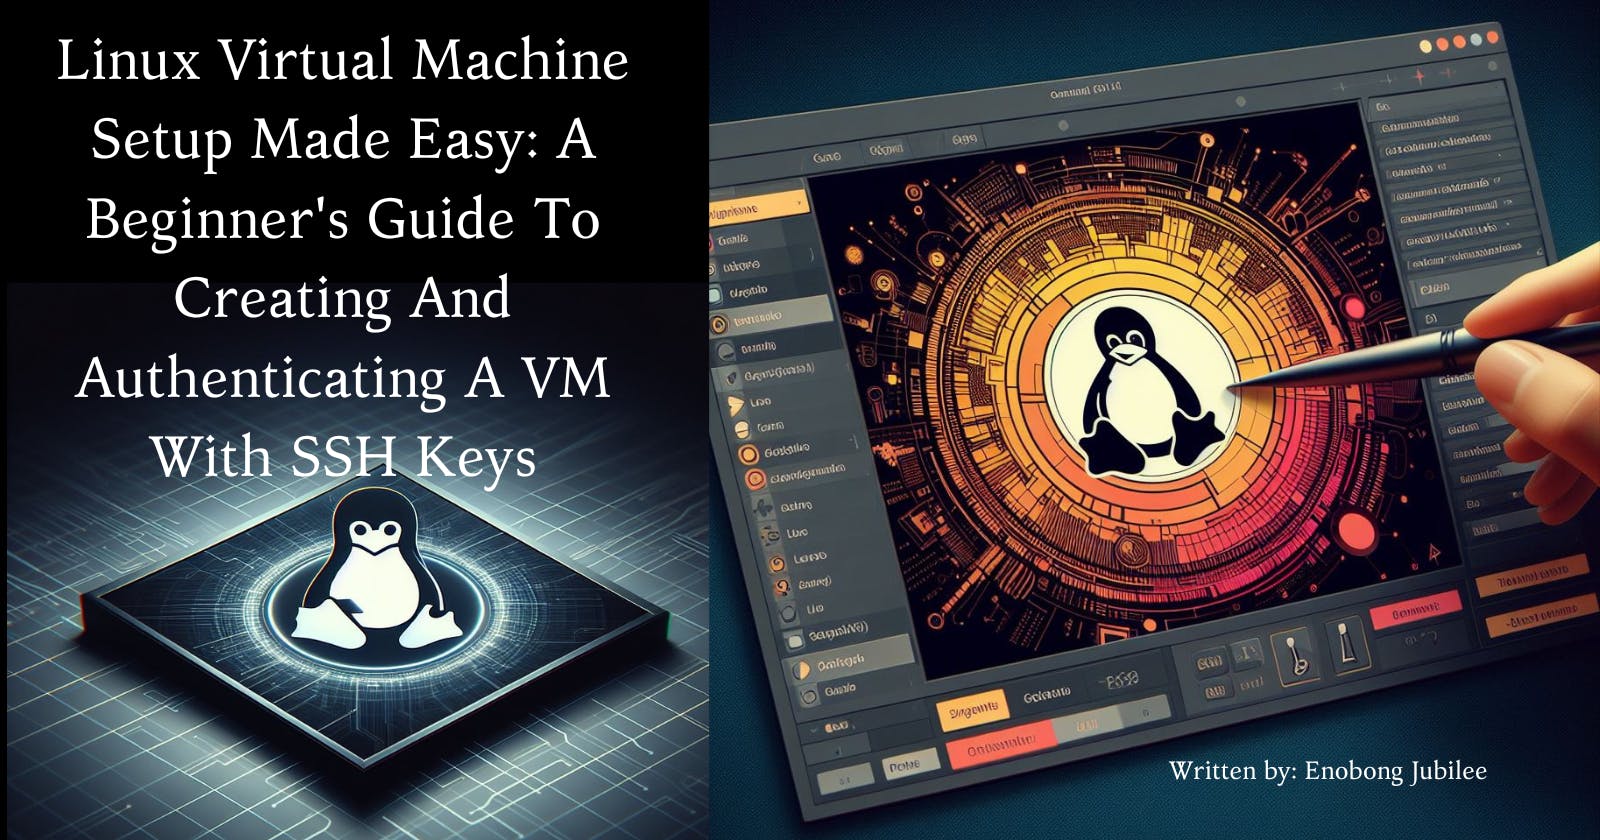 Linux Virtual Machine Setup Made Easy: A Beginner's Guide To Creating And Authenticating A VM With SSH Keys